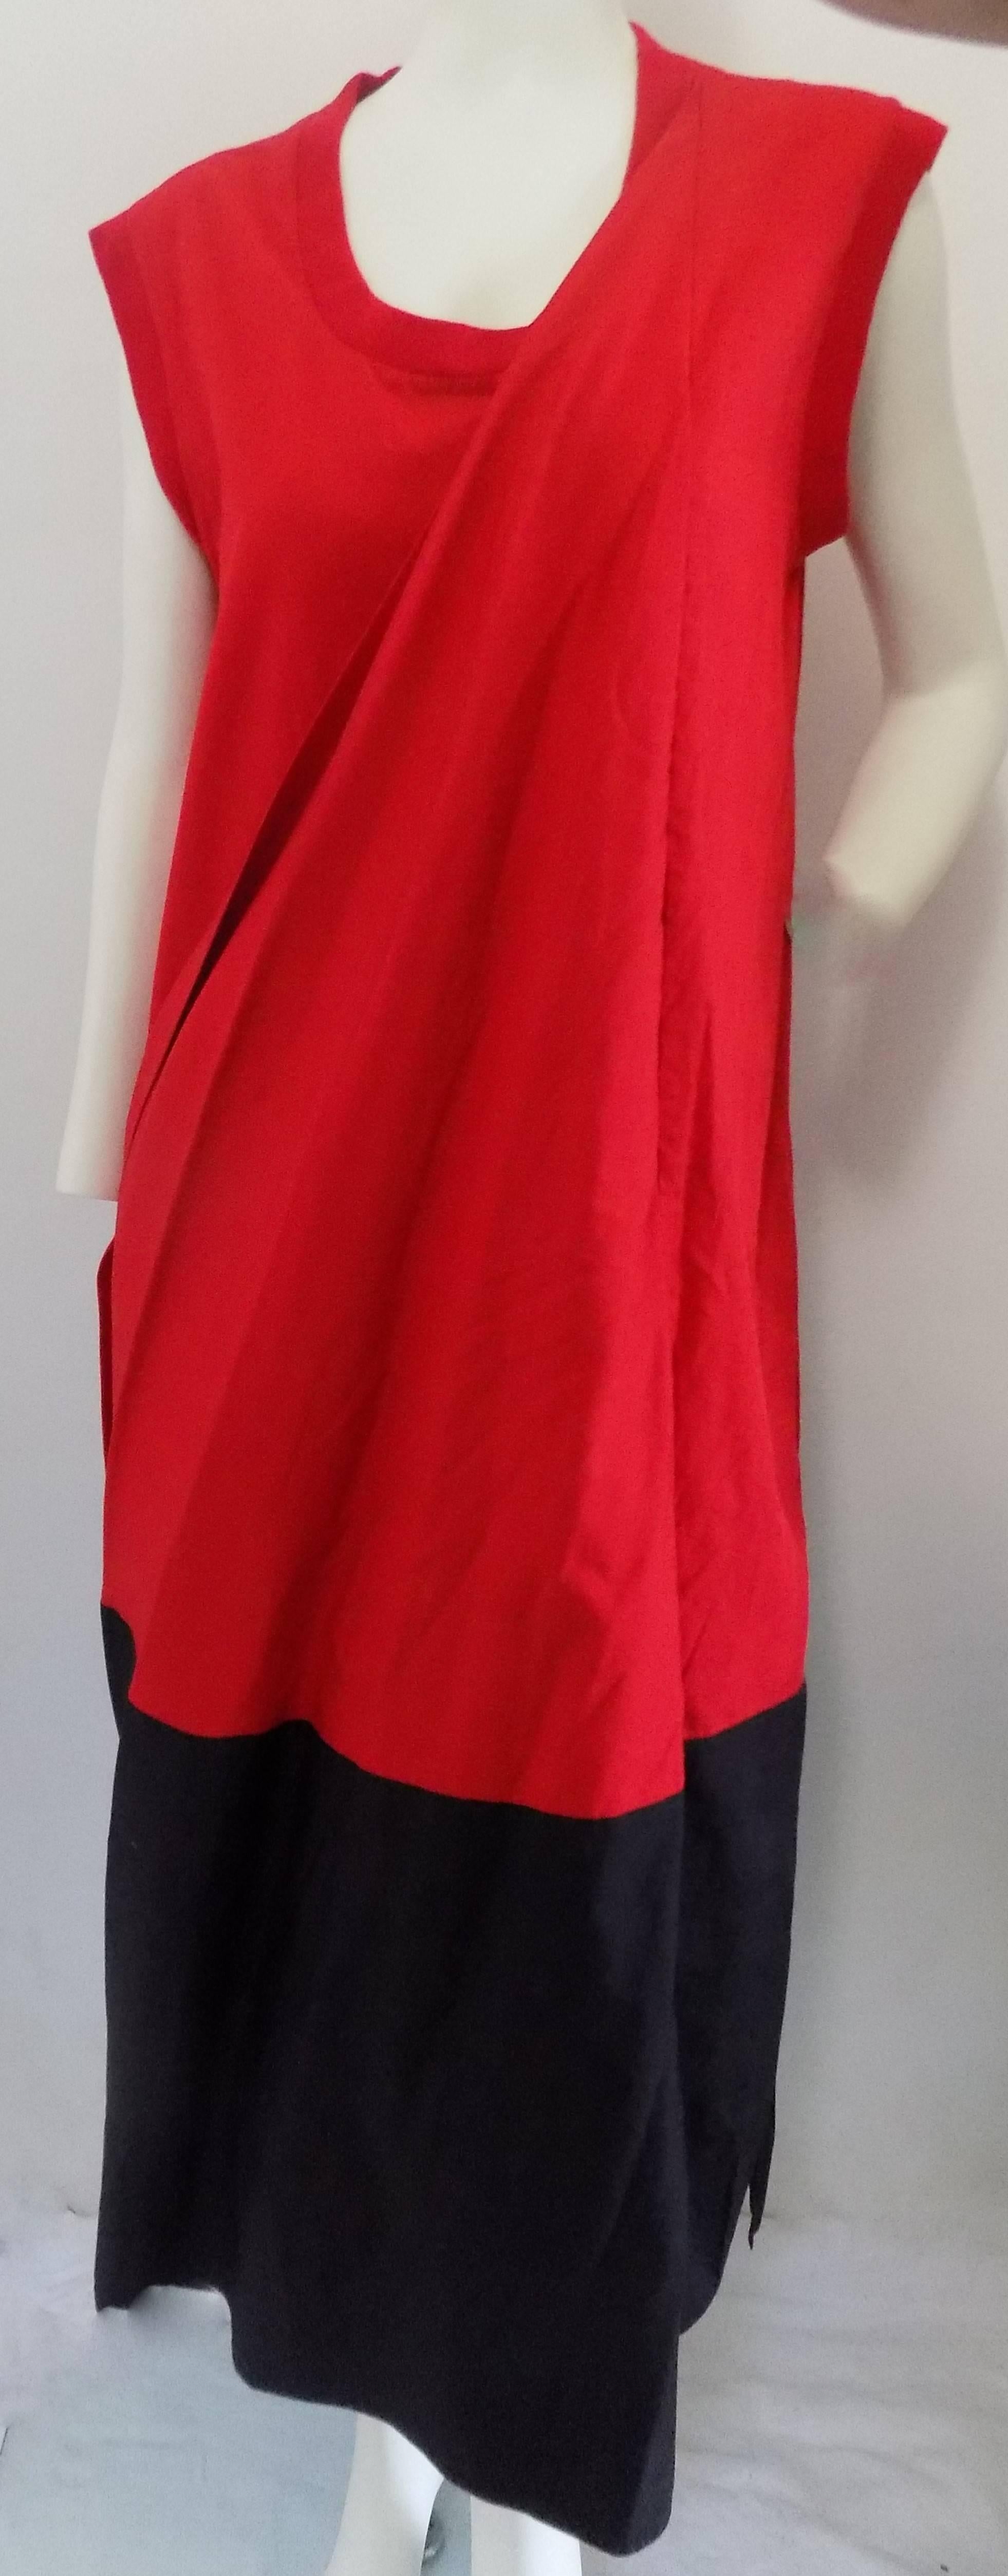 Mondrian Long Dress

Red and black long dress totally made in italy in italian size range 46

100% cotton